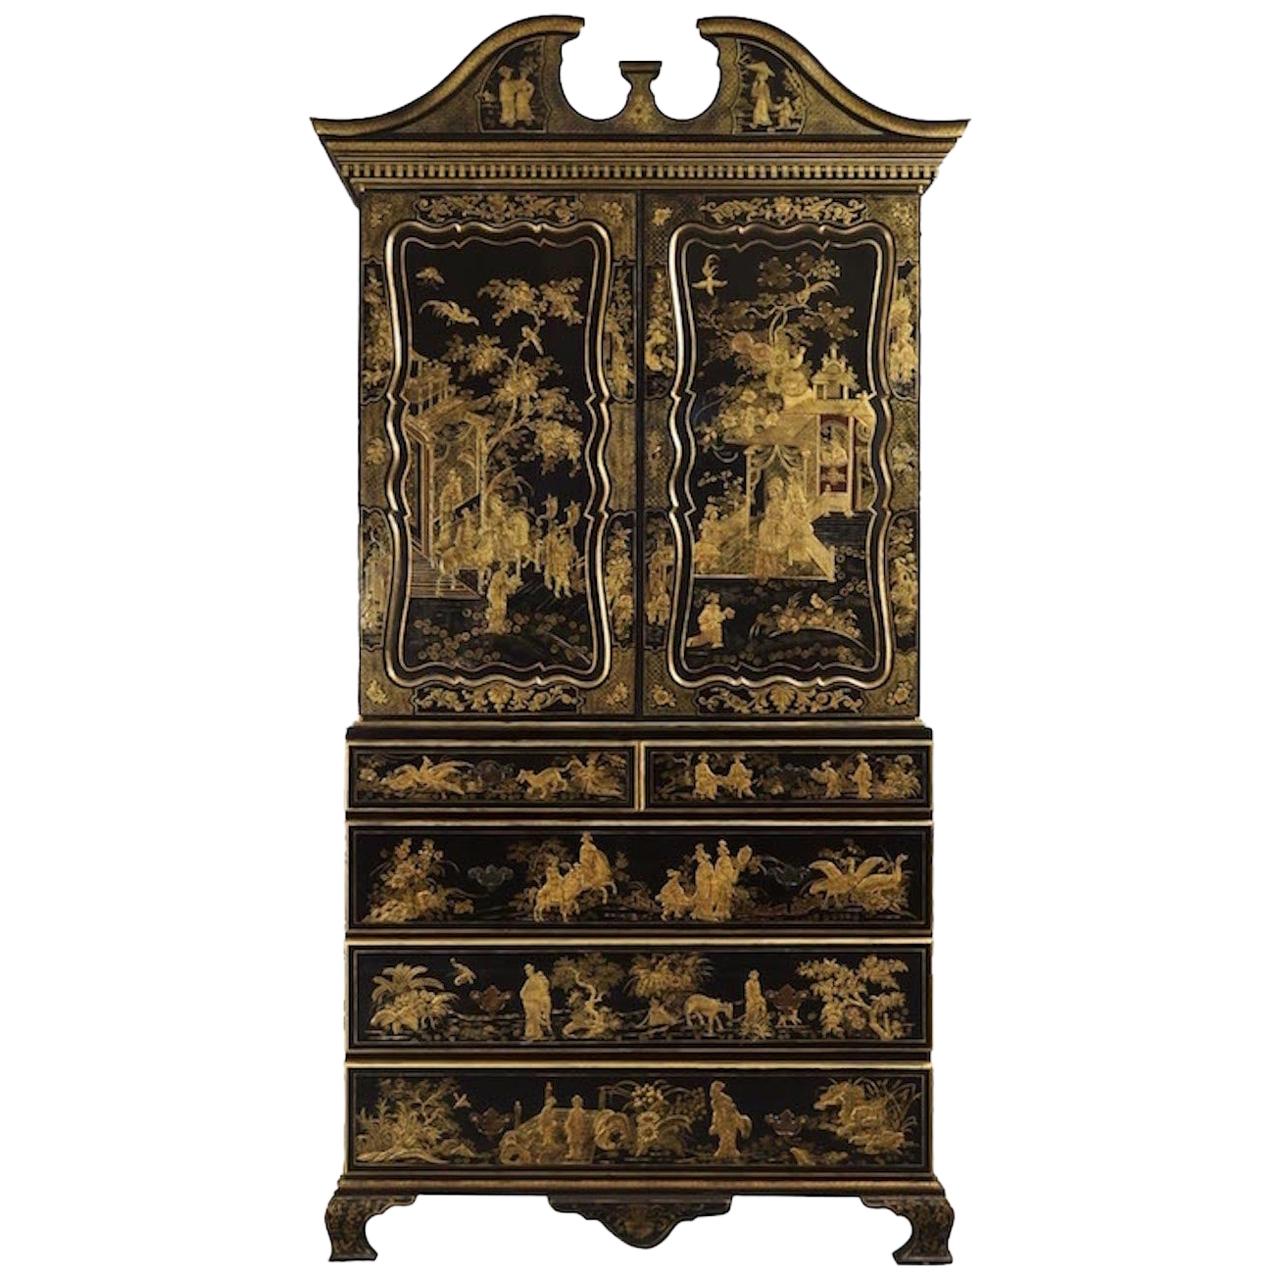 English Regency Style Black Lacquered and Gold Chinoiserie Decorated Cabinet